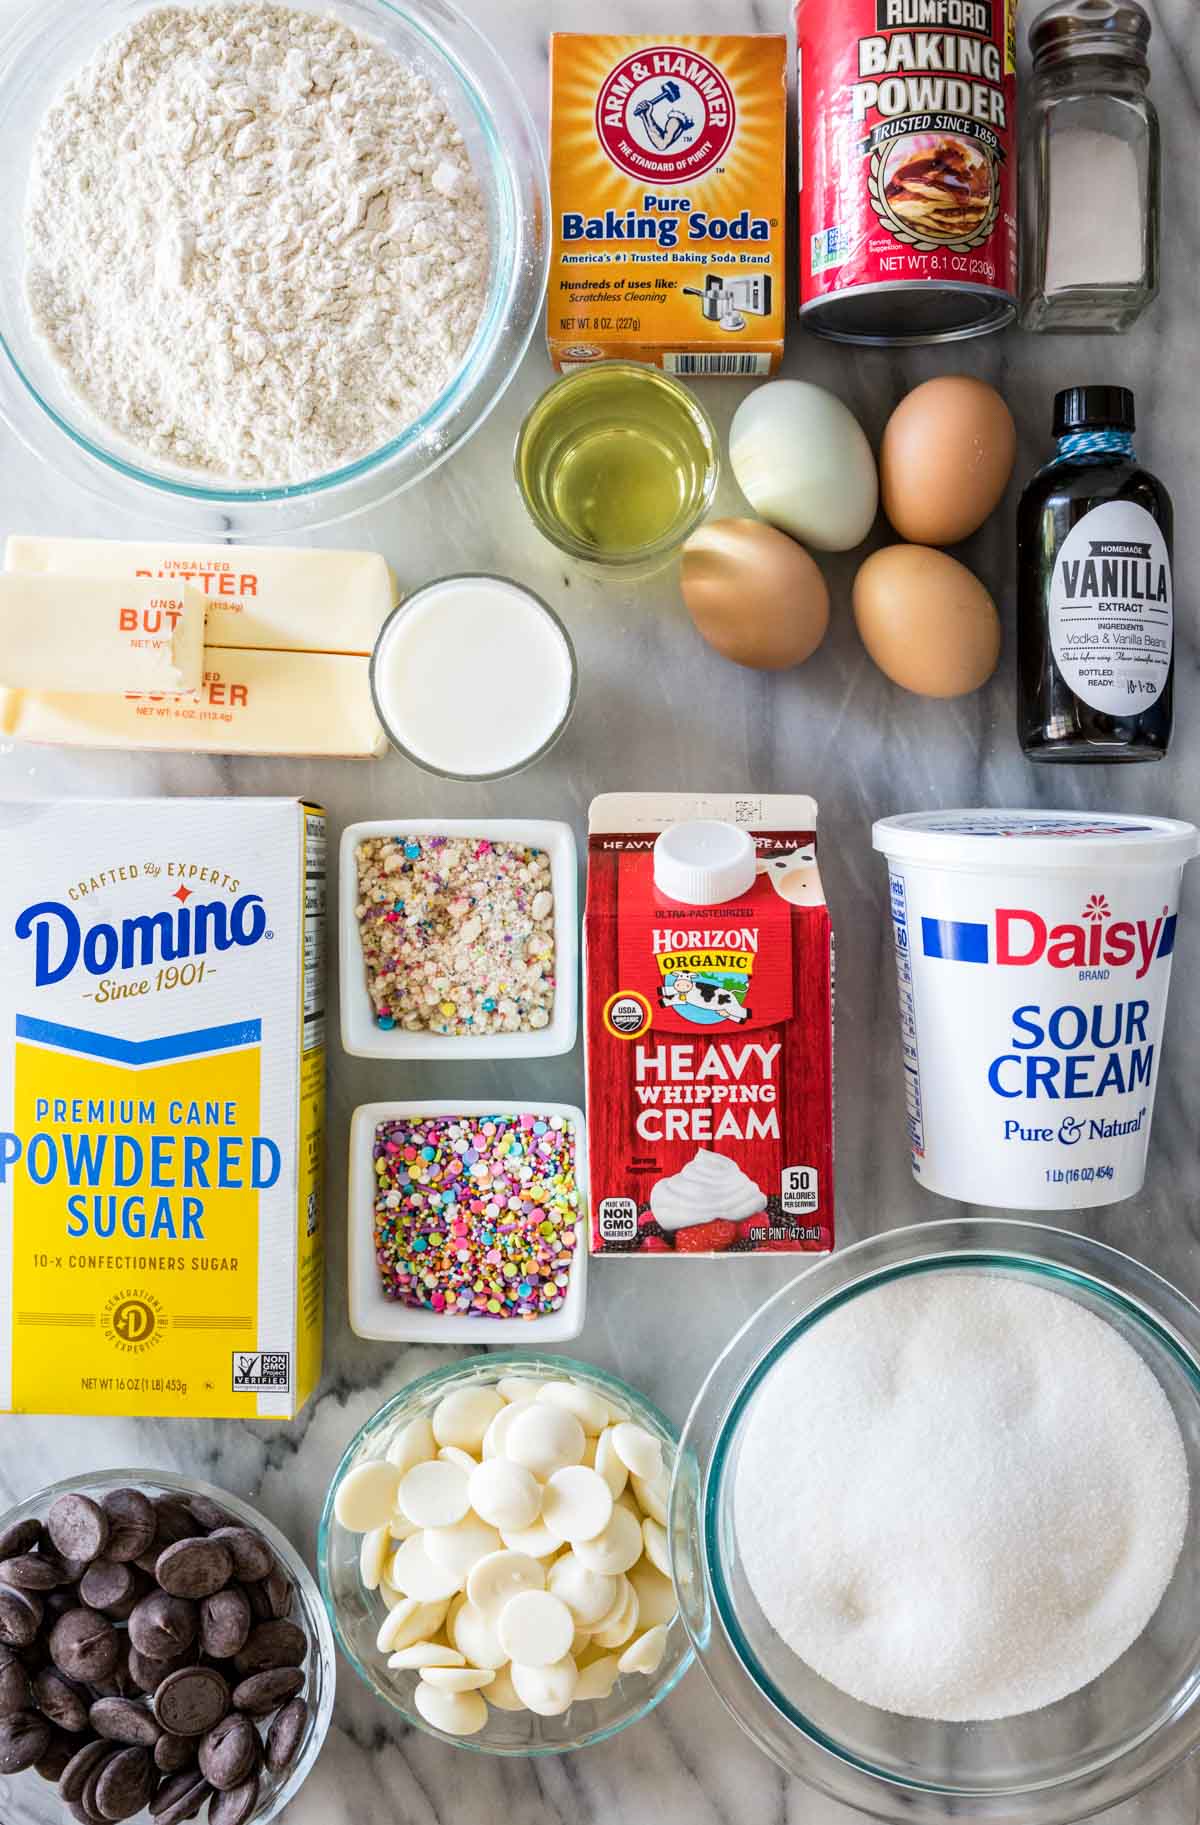 Overhead view of ingredients including flour, butter, powdered sugar, sprinkles, sour cream, and more.